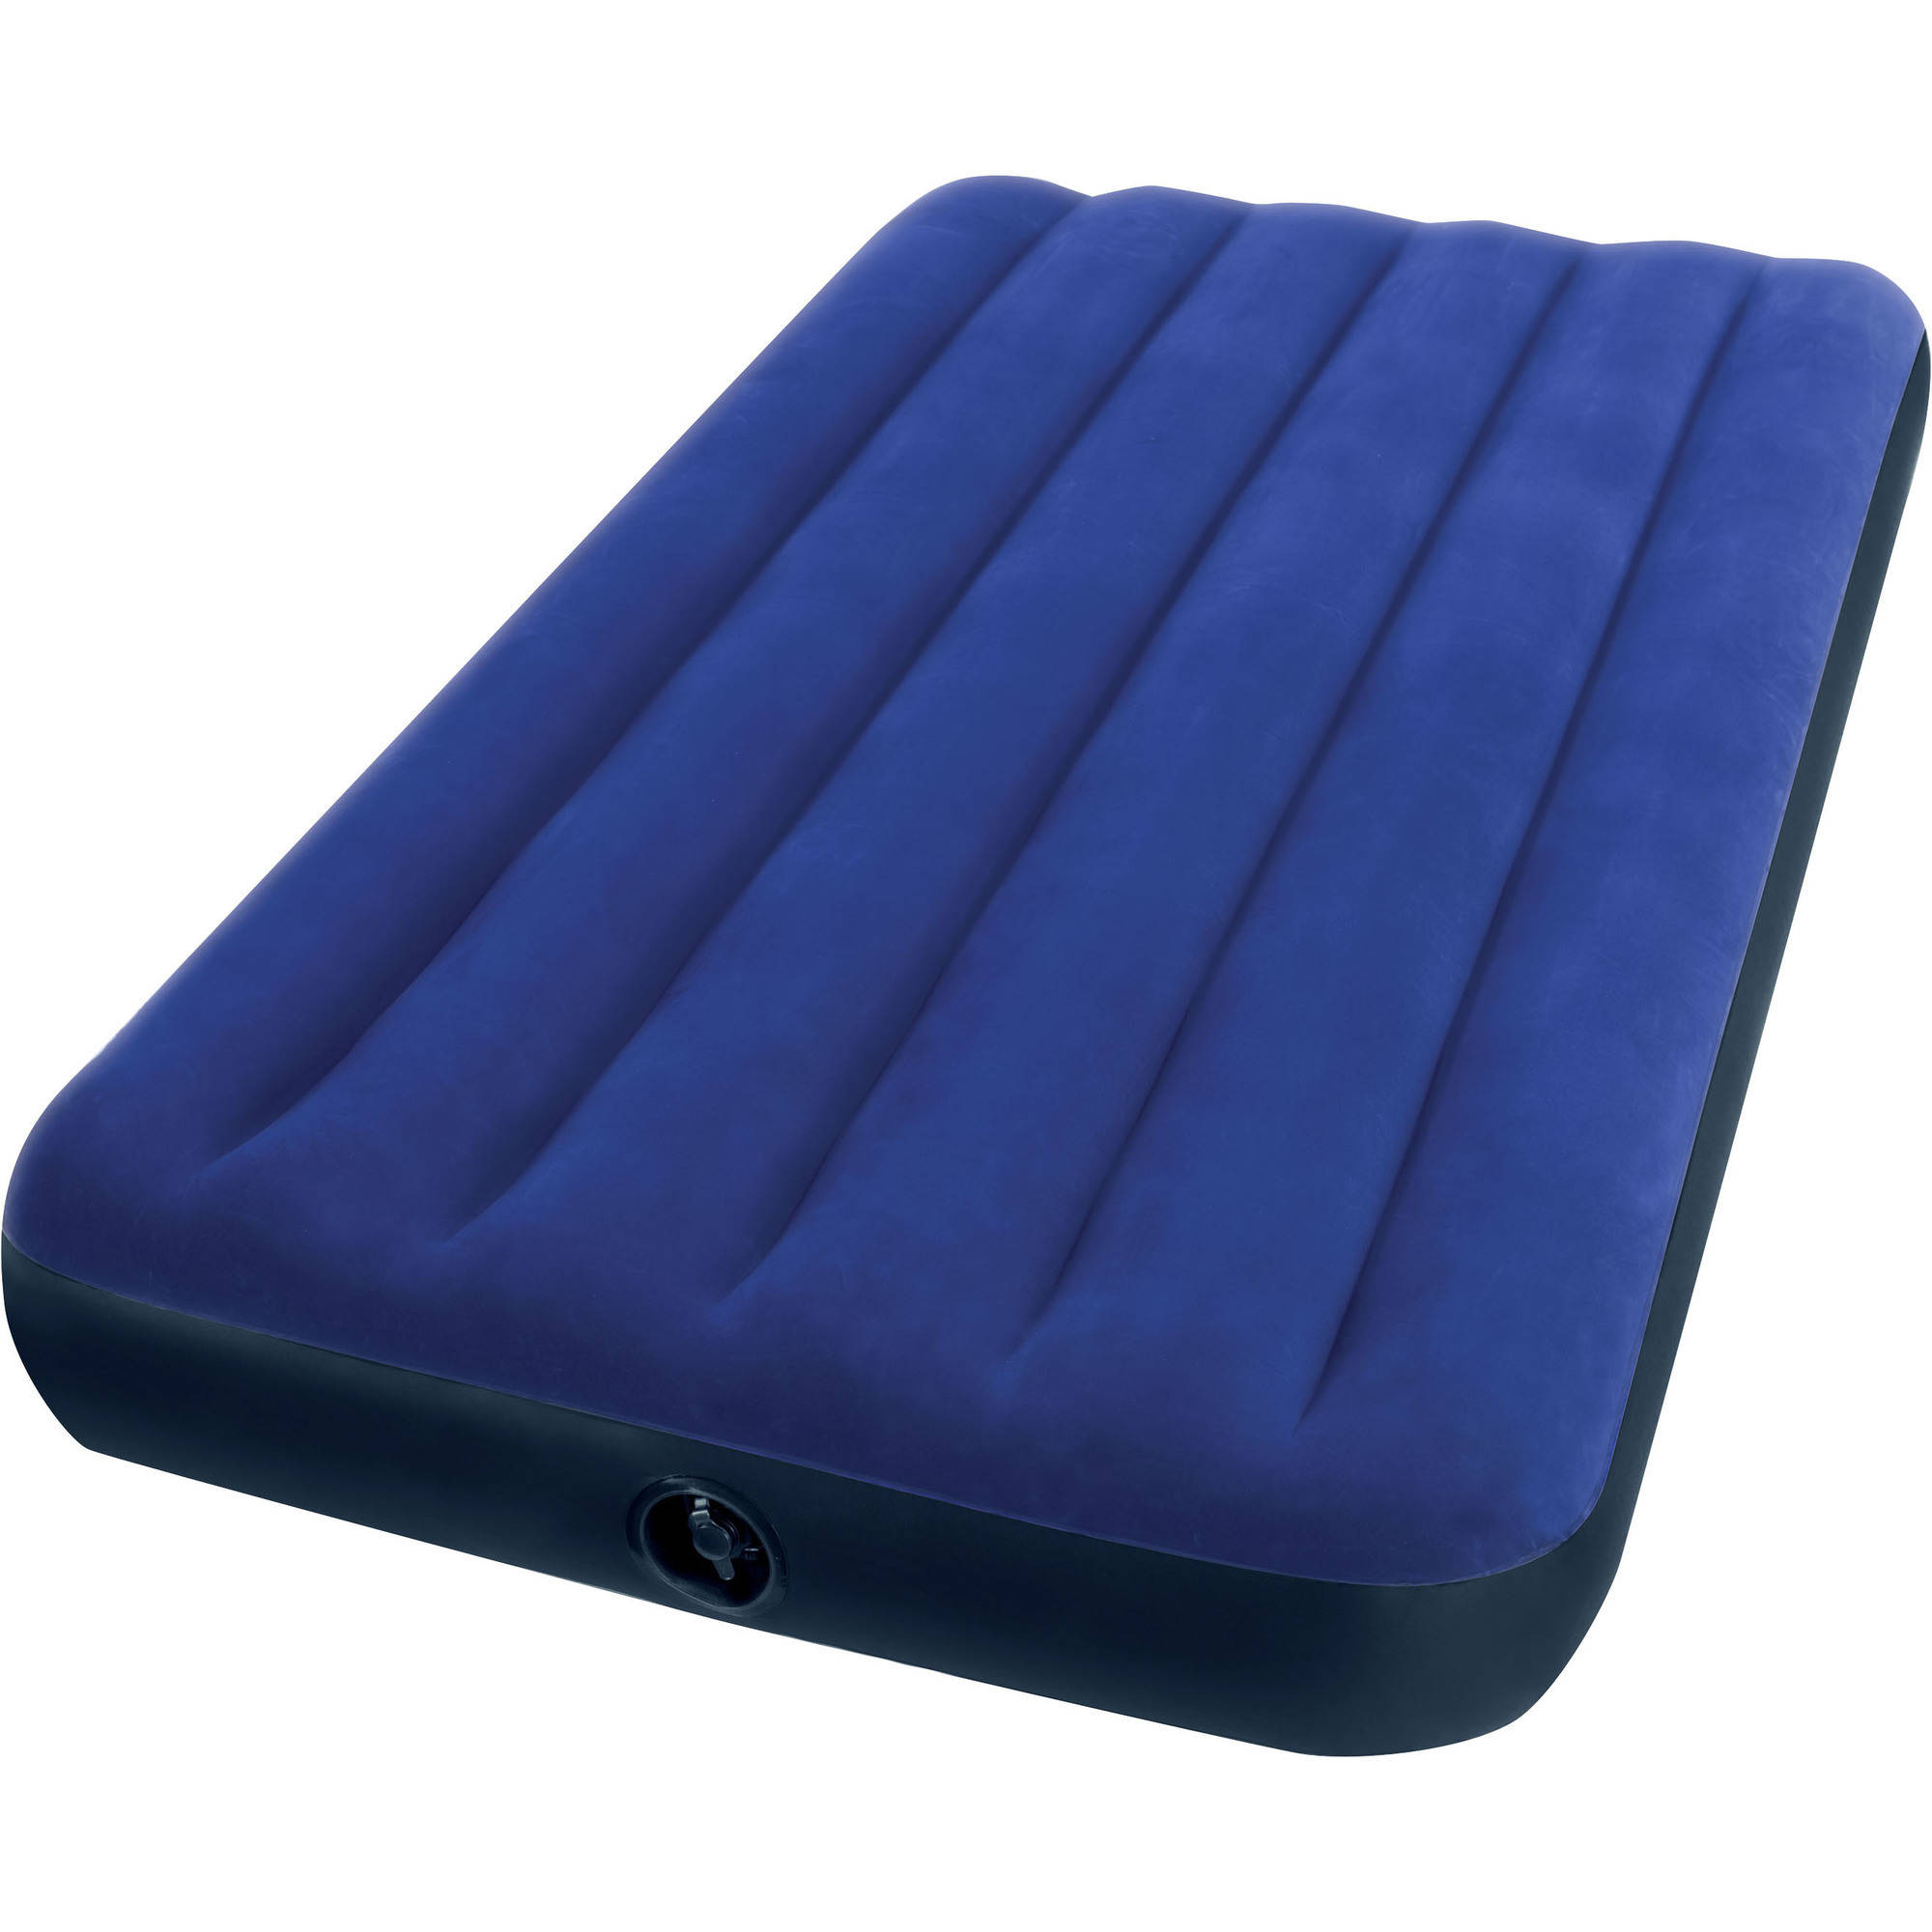 Intex twin 8.75″ Classic Downy inflatable airbed mattress for $8, queen for $15